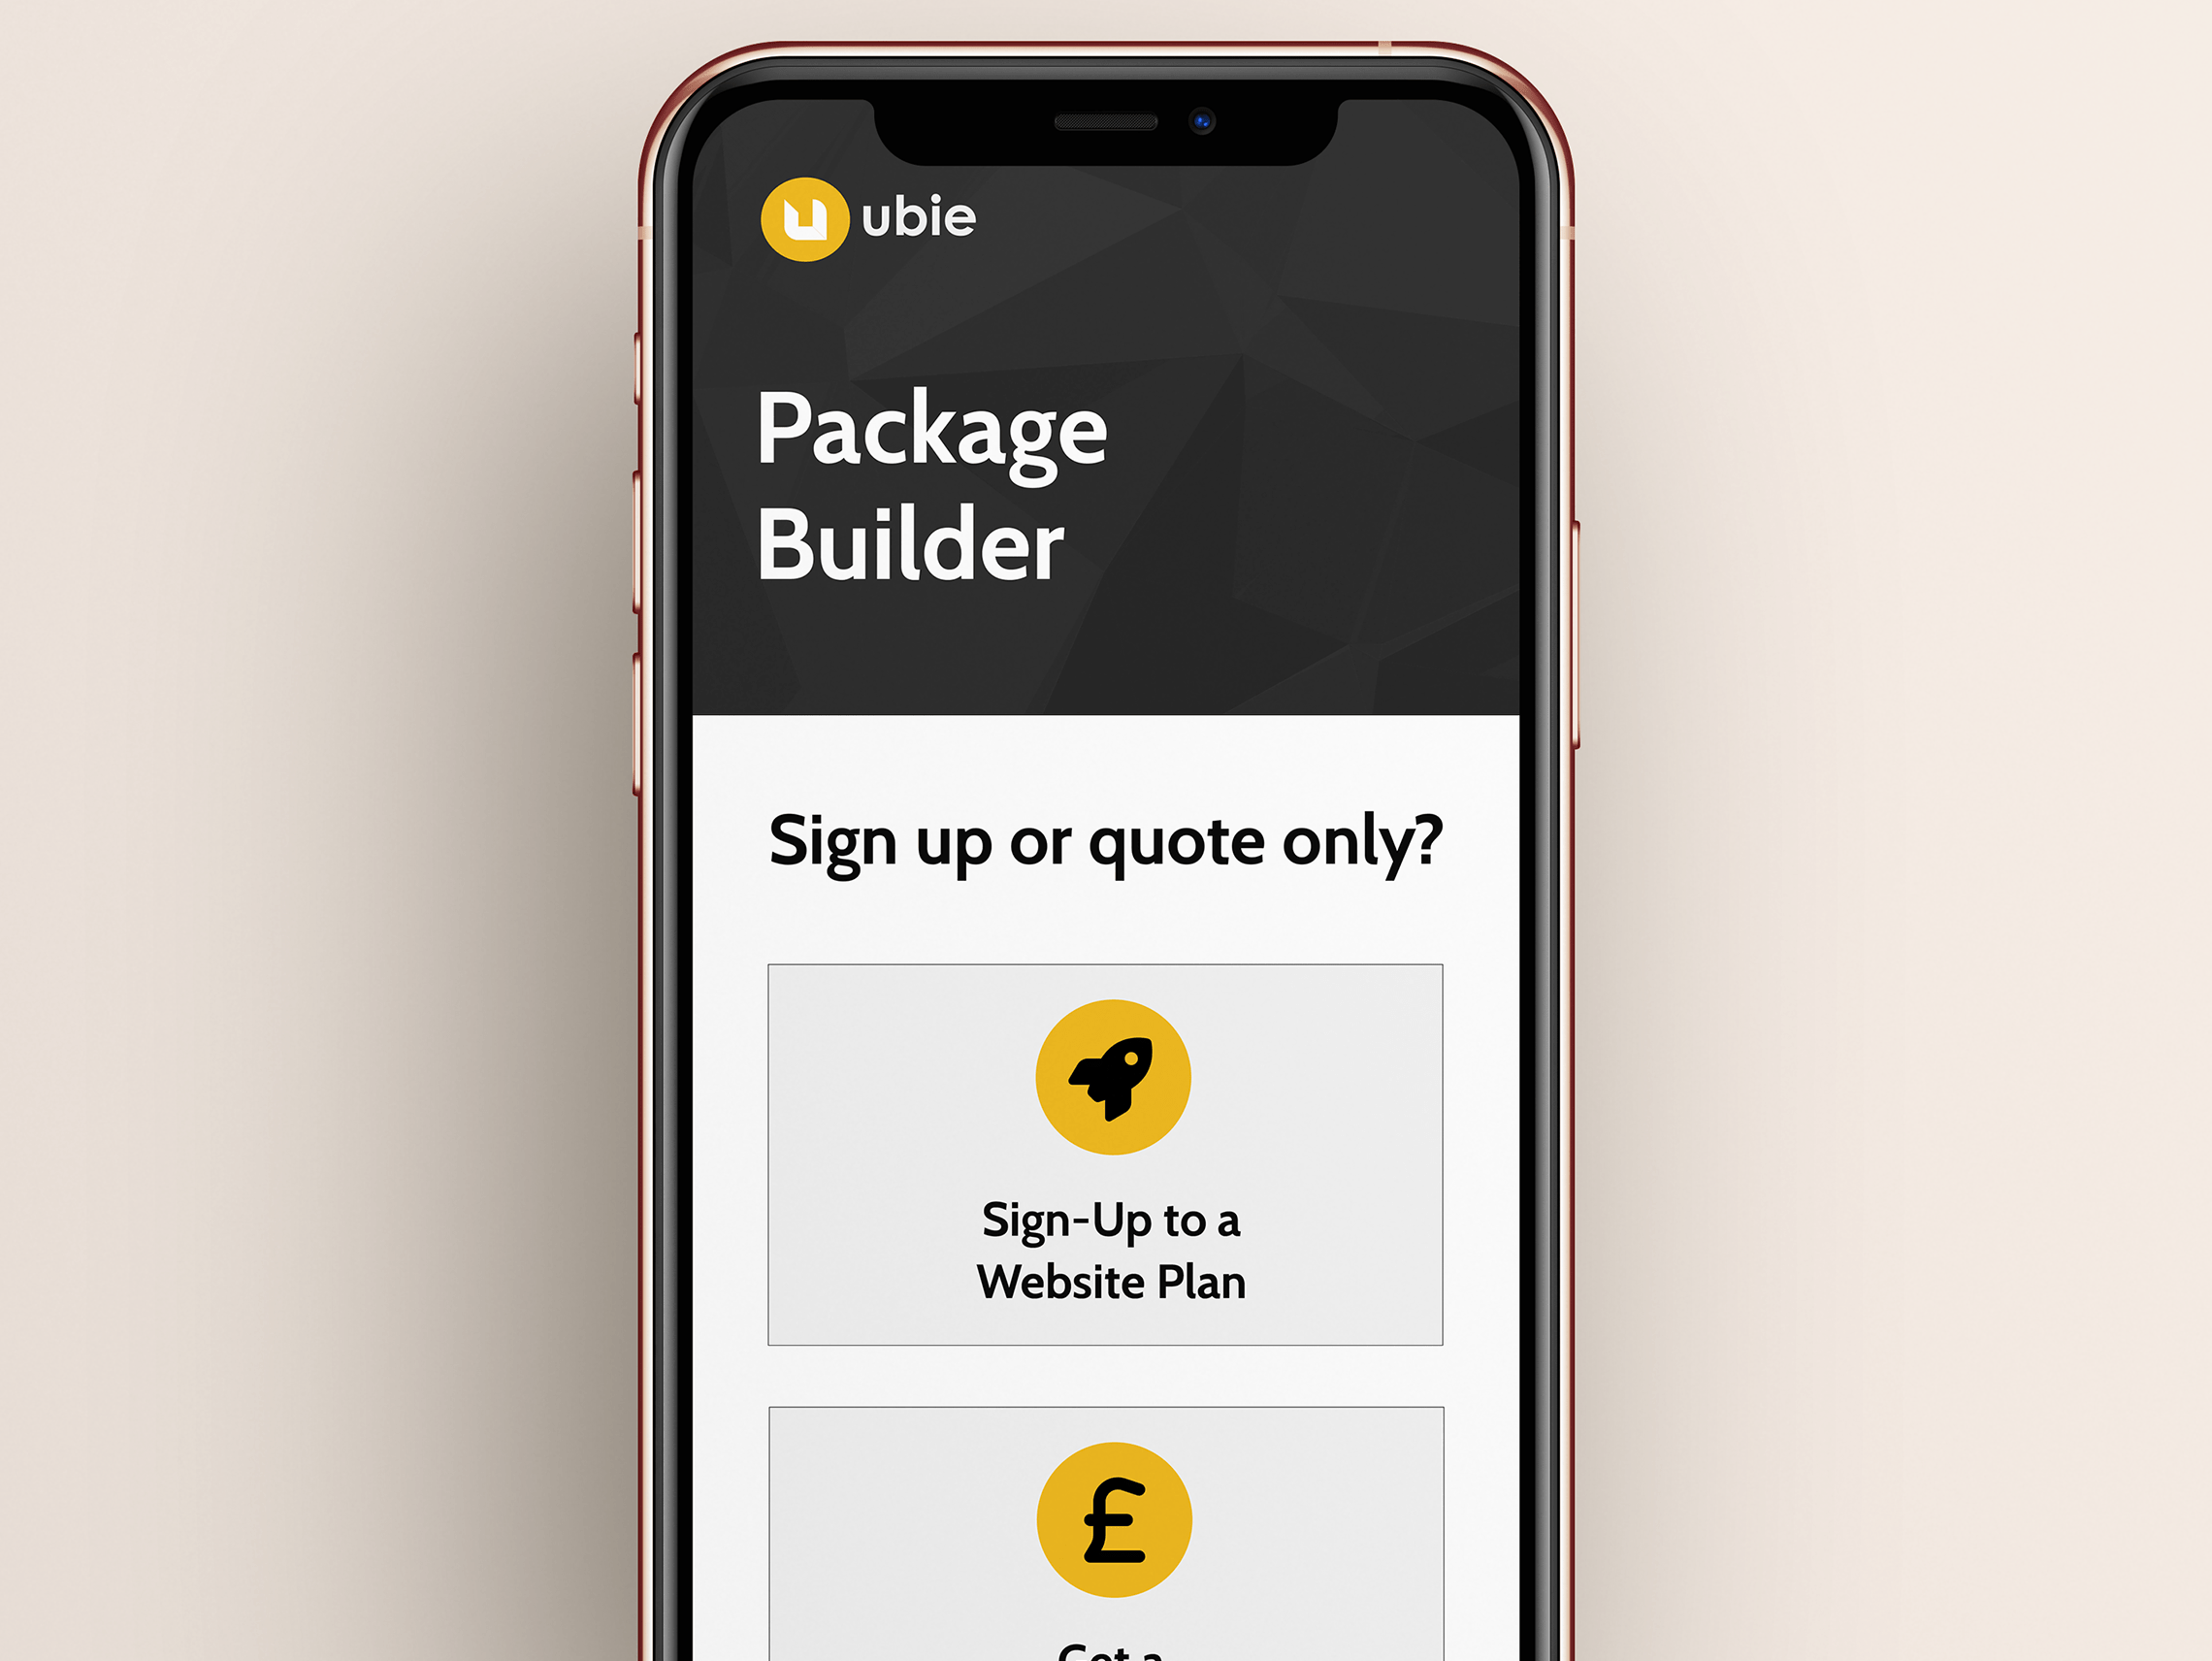 Ubie package builder on an iphone mobile phone